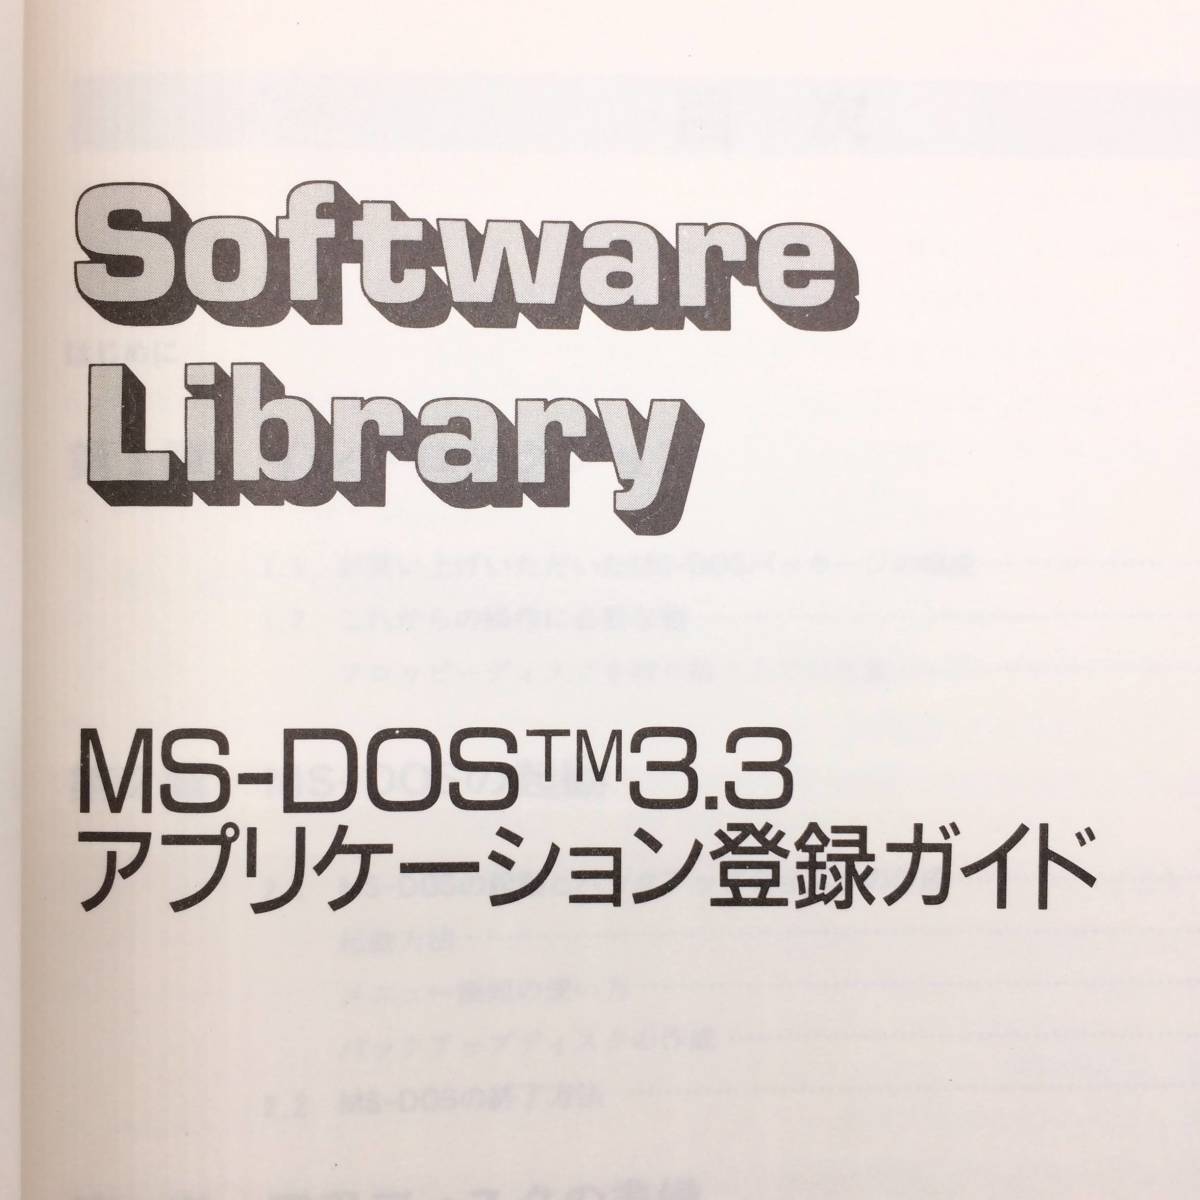 [ Yu-Mail free shipping ]NEC personal computer PC-9800 series Japanese input guide |MS-DOS3.3 Application registration guide 0505